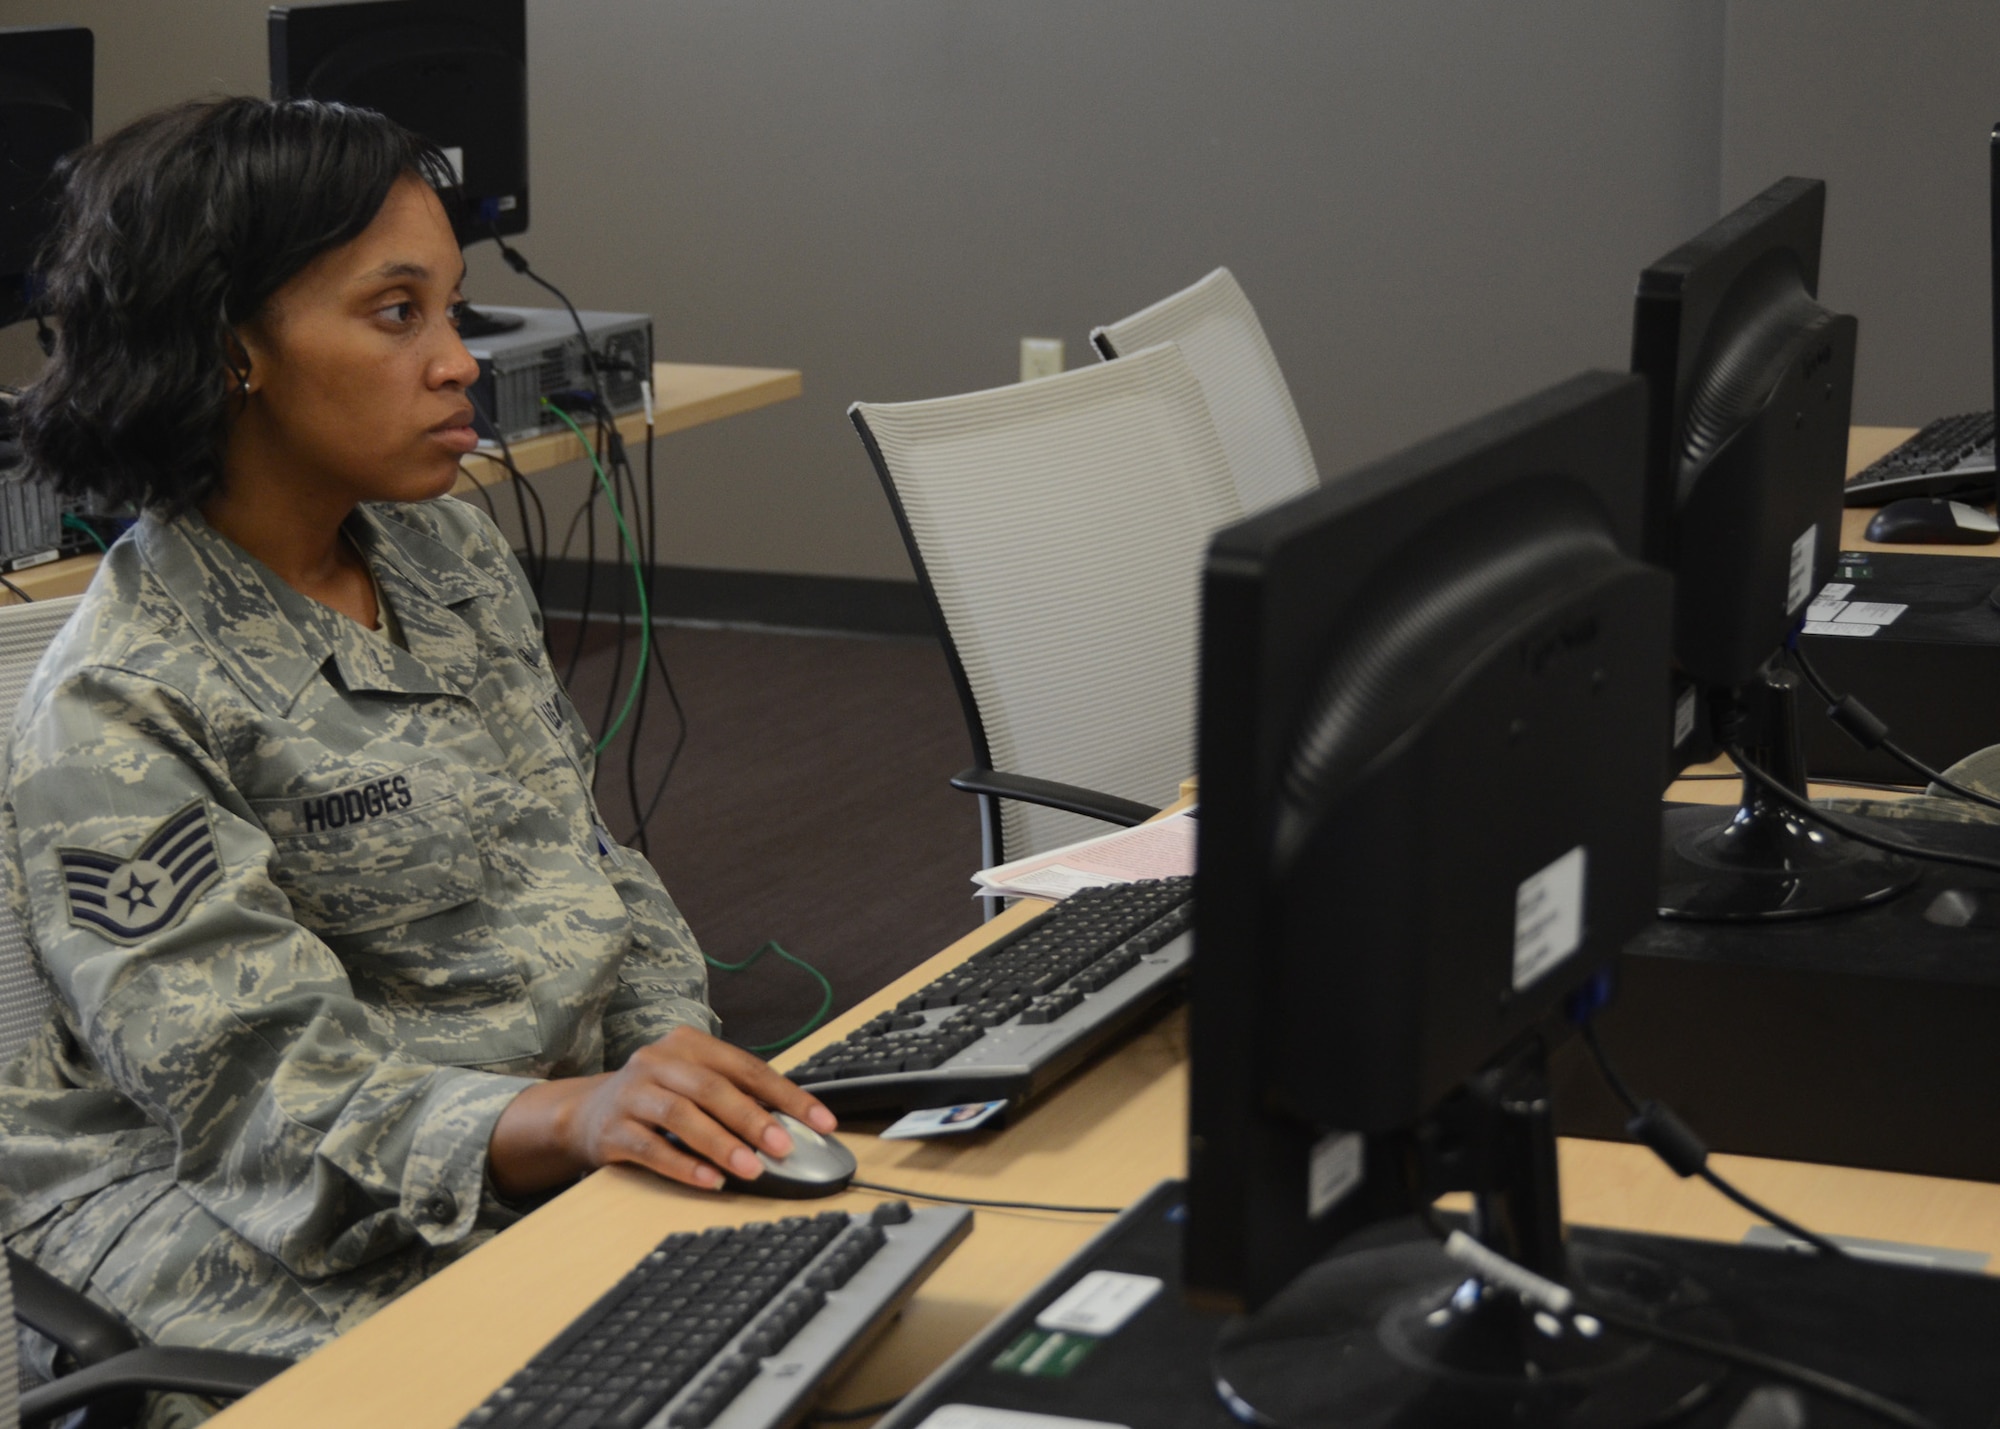 Computer labs provided valuable online training time to many Citizen Airmen during AT training week June 16-22, 2014, at Whiteman Air Force Base, Missouri. (U.S. Air National Guard photo by Staff Sgt. Brittany Cannon)